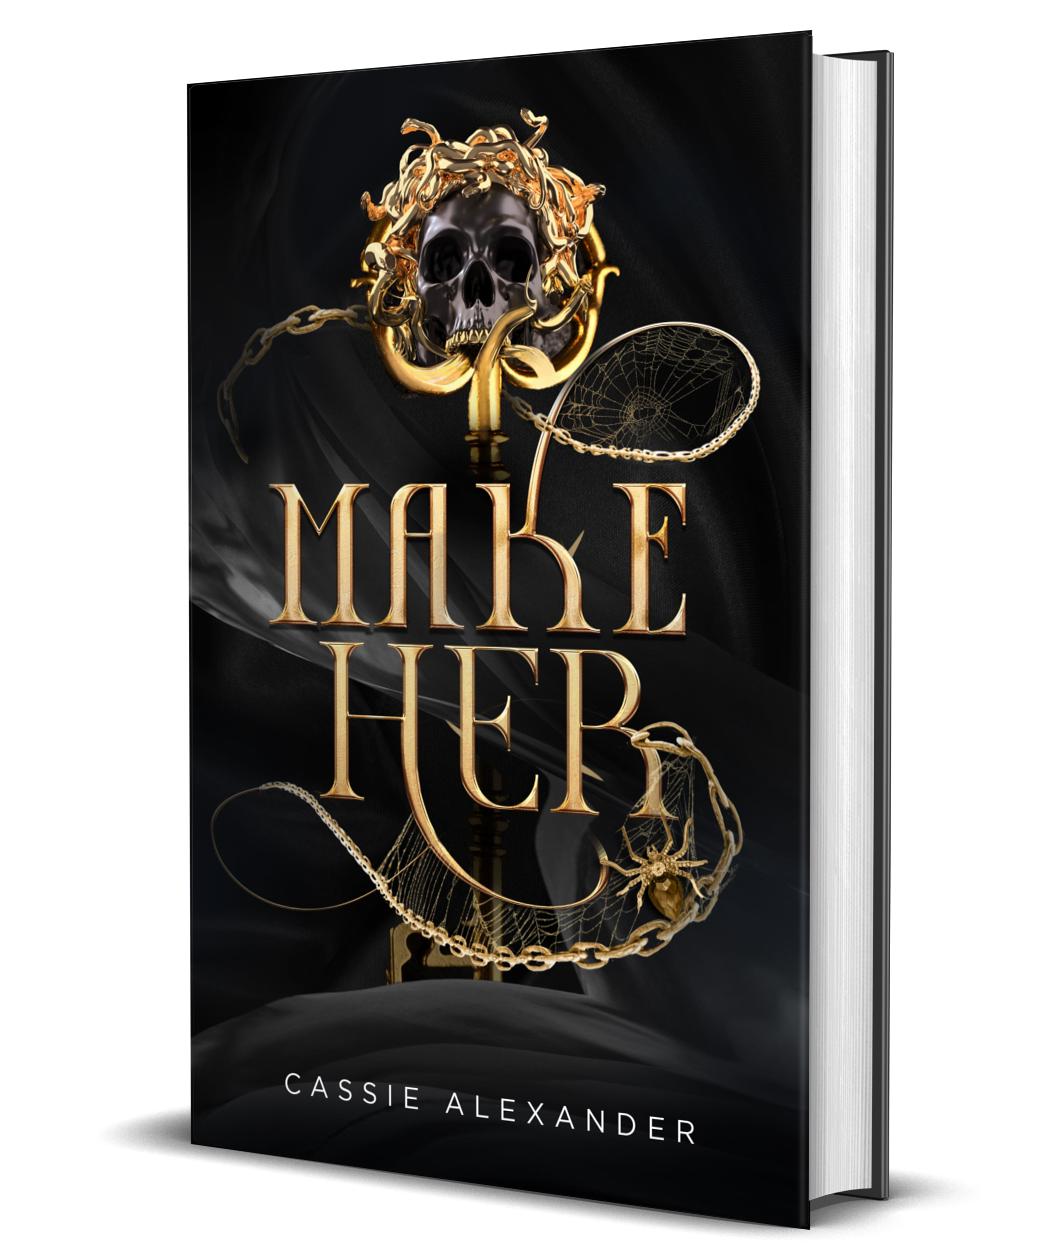 Make Her: Transformation Trilogy - Book 3 (Special Edition Hardcover)